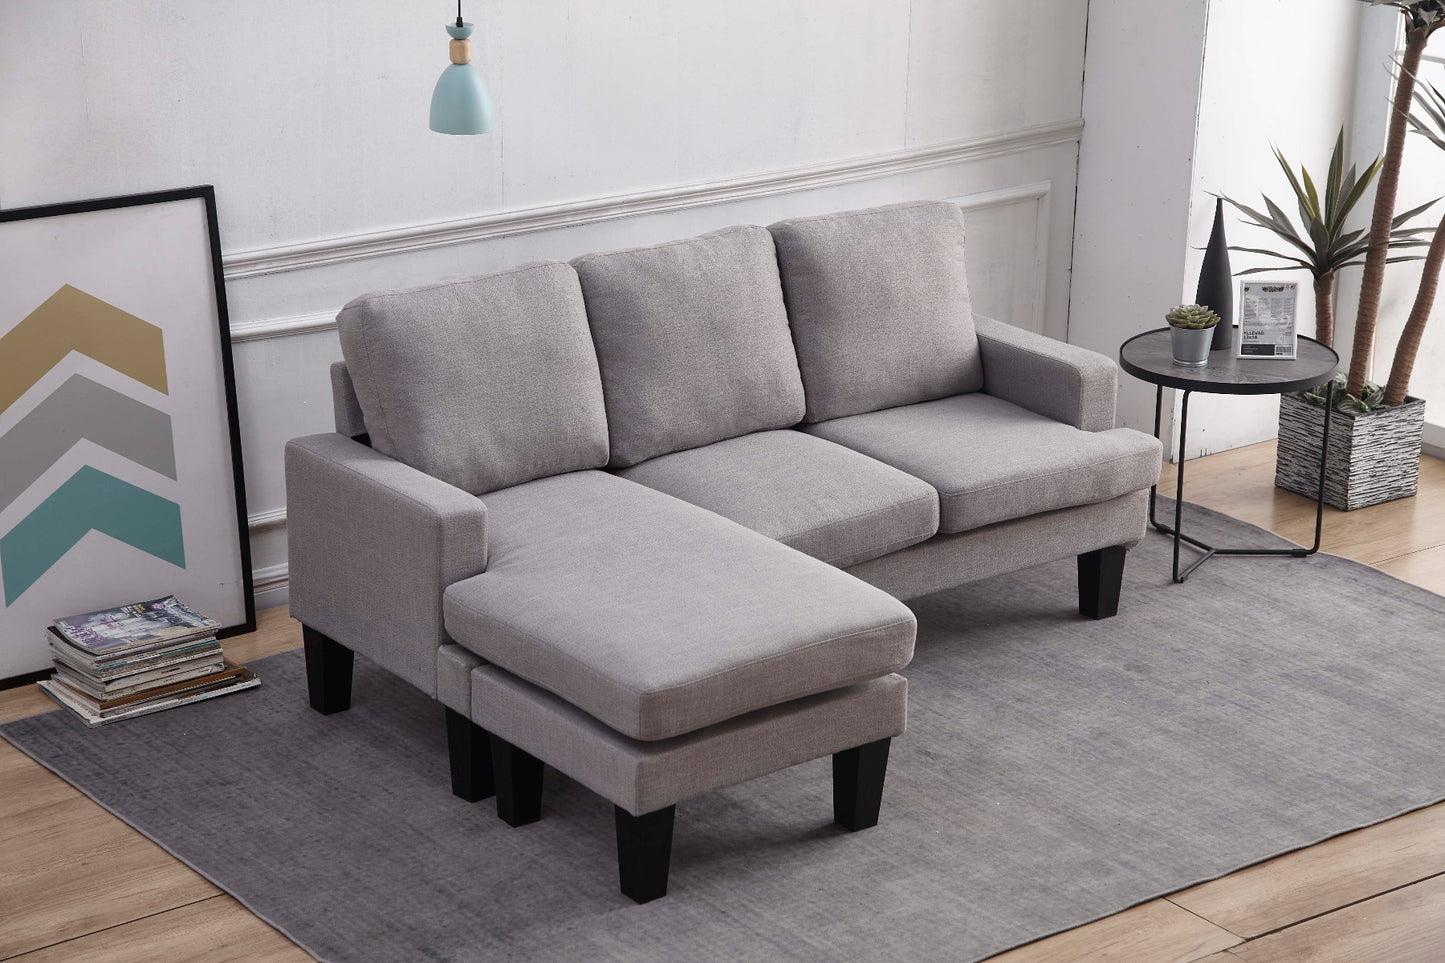 Reversible Sectional Sofa - 3 Colors